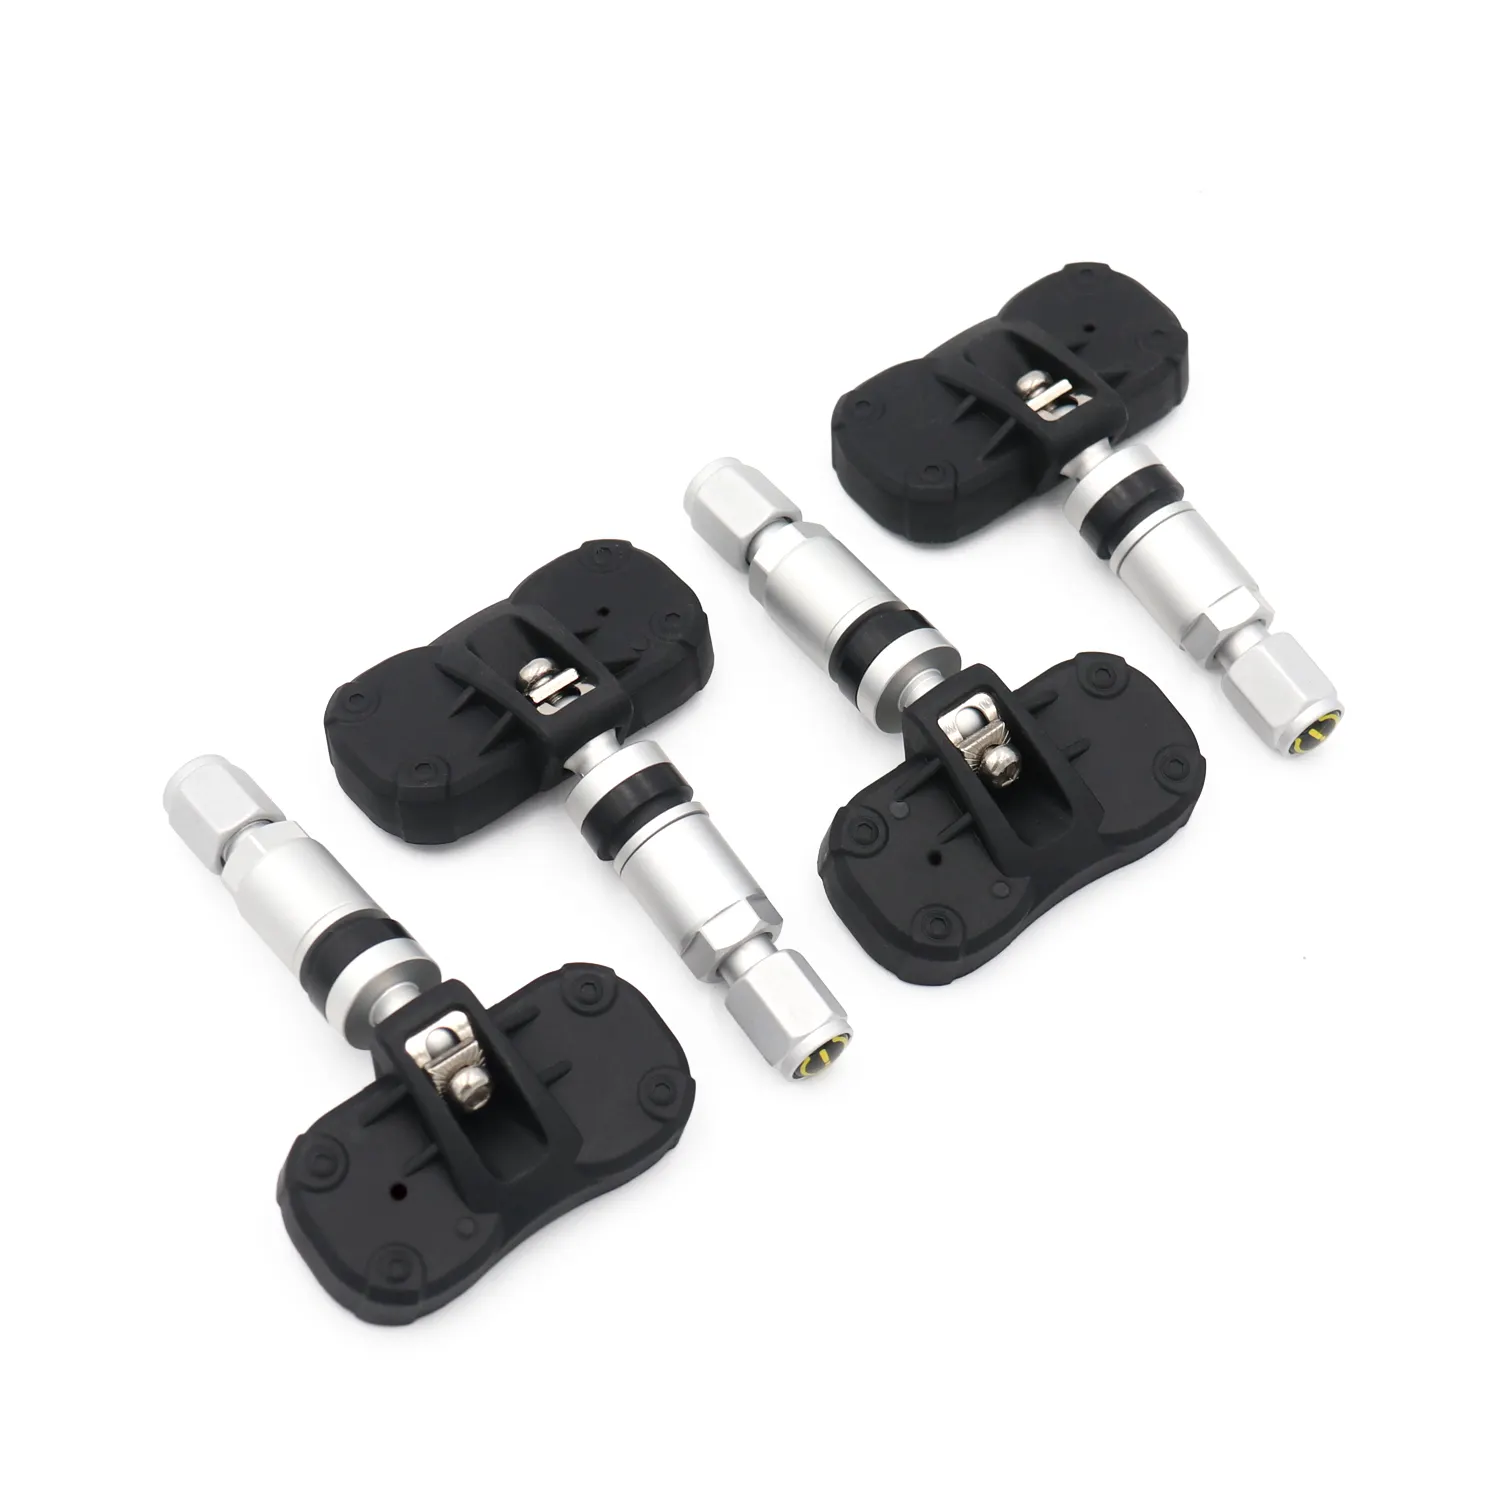 Long-Lasting tpms bluetooth tyre pressure monitoring Bluetooth TPMS for iOS Phone and Android BLE5.0 TPMSII